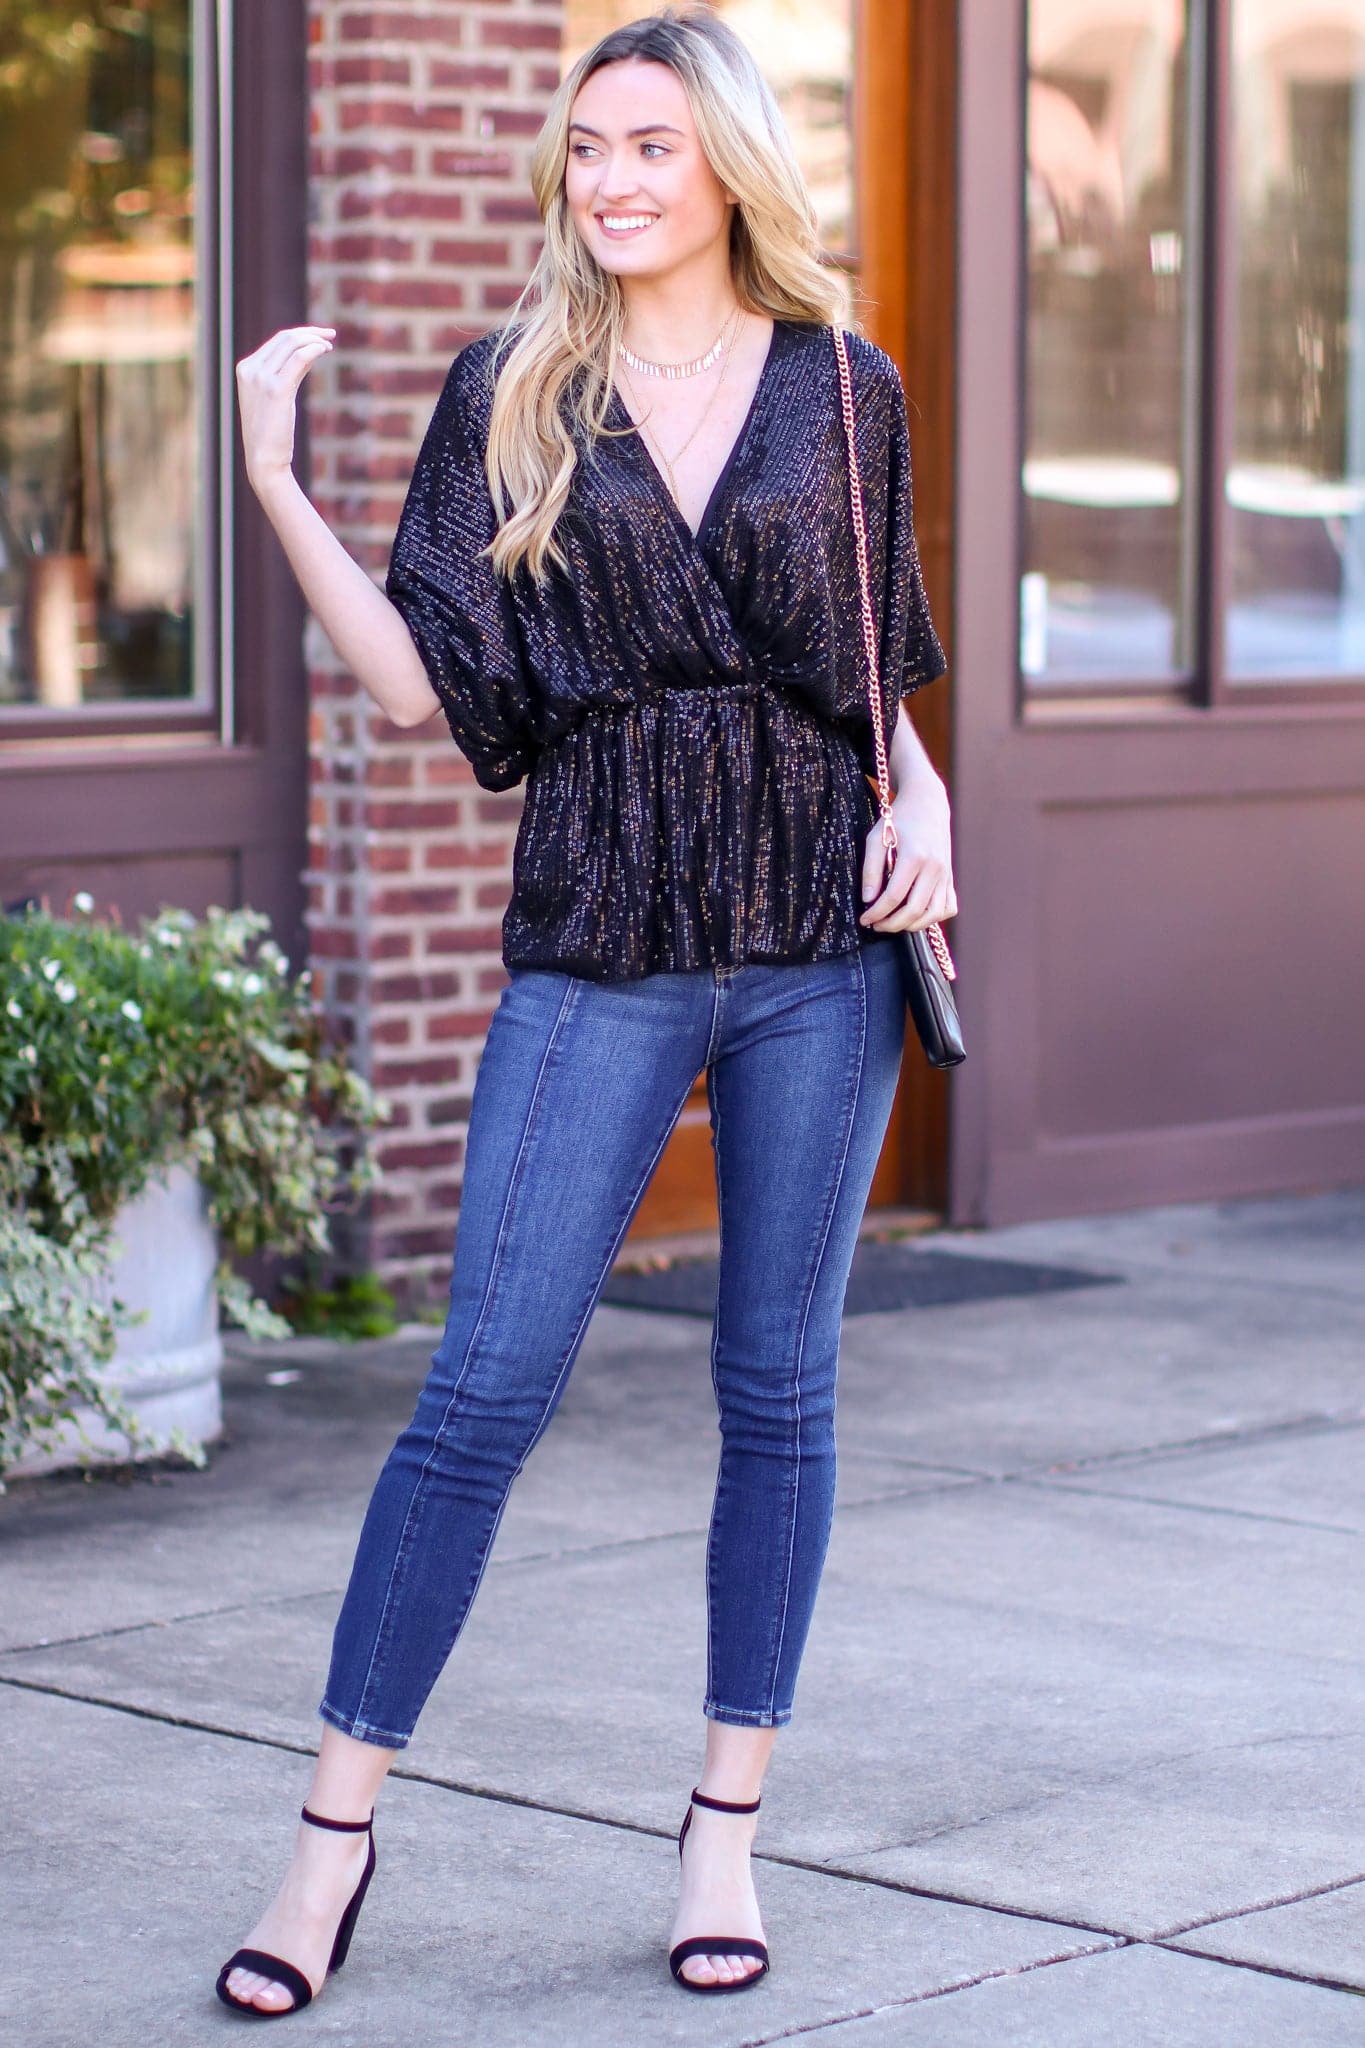  Sequins of Events V-Neck Top - FINAL SALE - Madison and Mallory